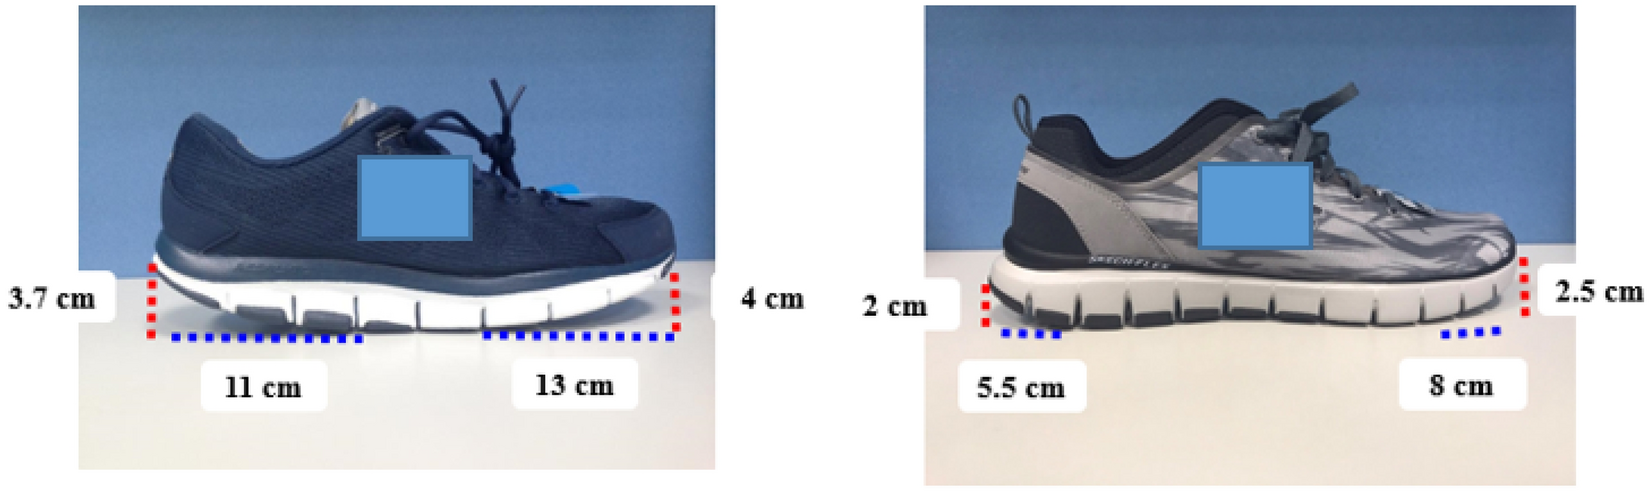 Dimensions and properties of US9 a: Standard shoe, b: Foot regions, and